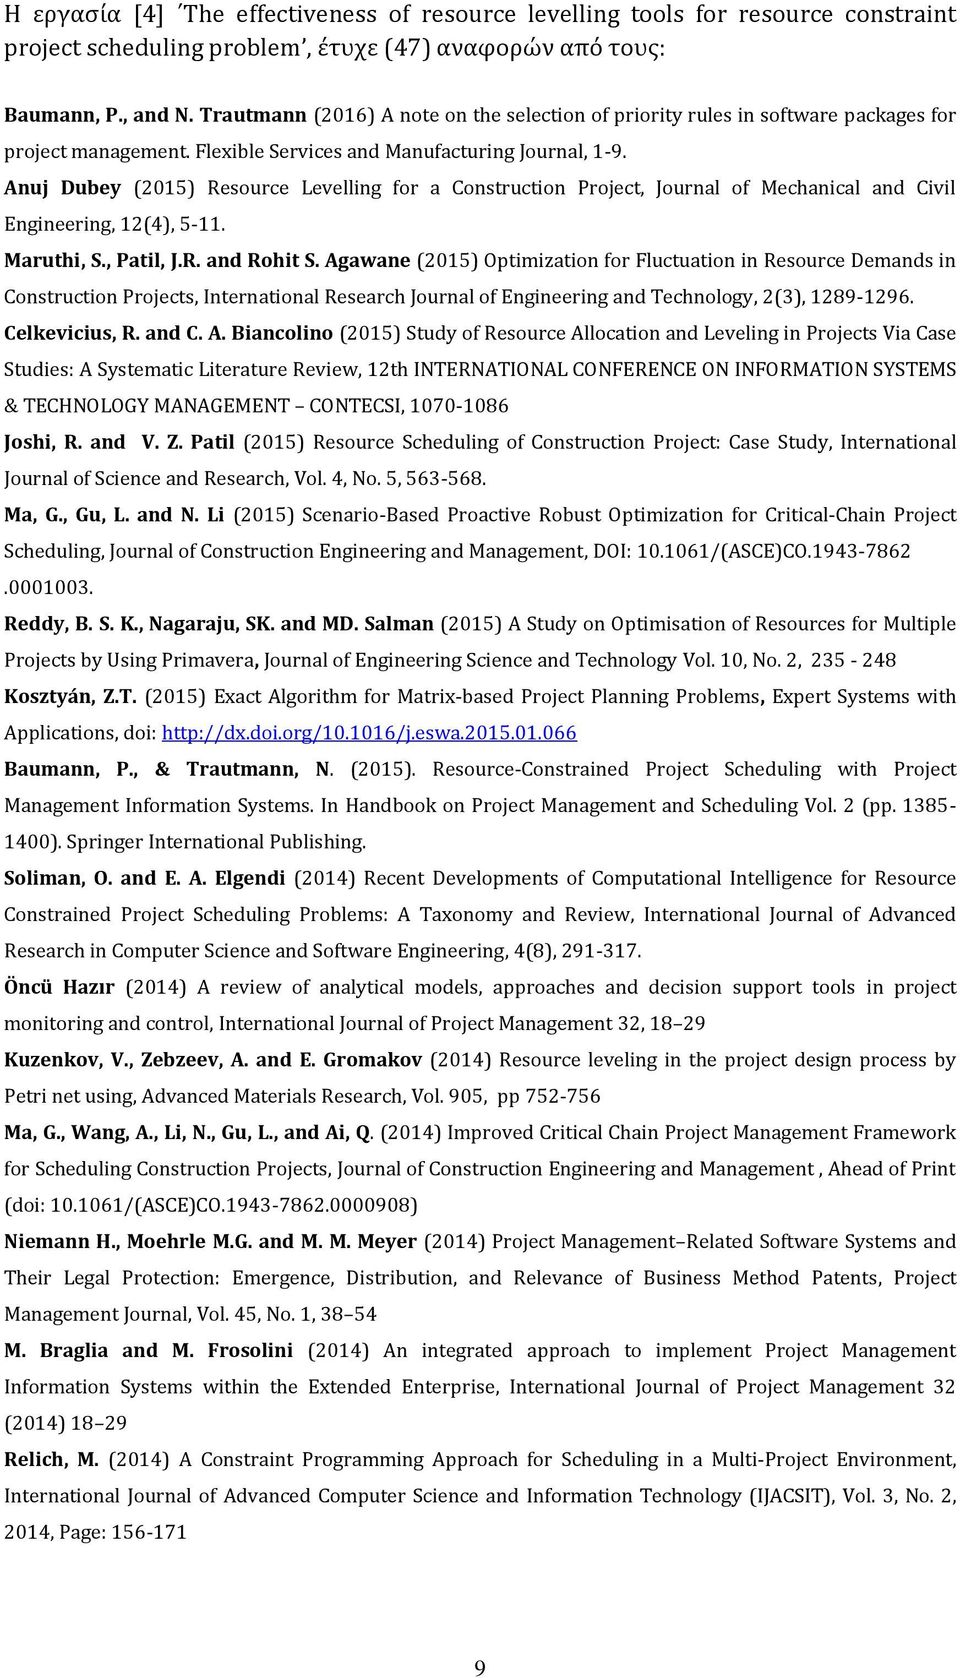 Anuj Dubey (2015) Resource Levelling for a Construction Project, Journal of Mechanical and Civil Engineering, 12(4), 5-11. Maruthi, S., Patil, J.R. and Rohit S.